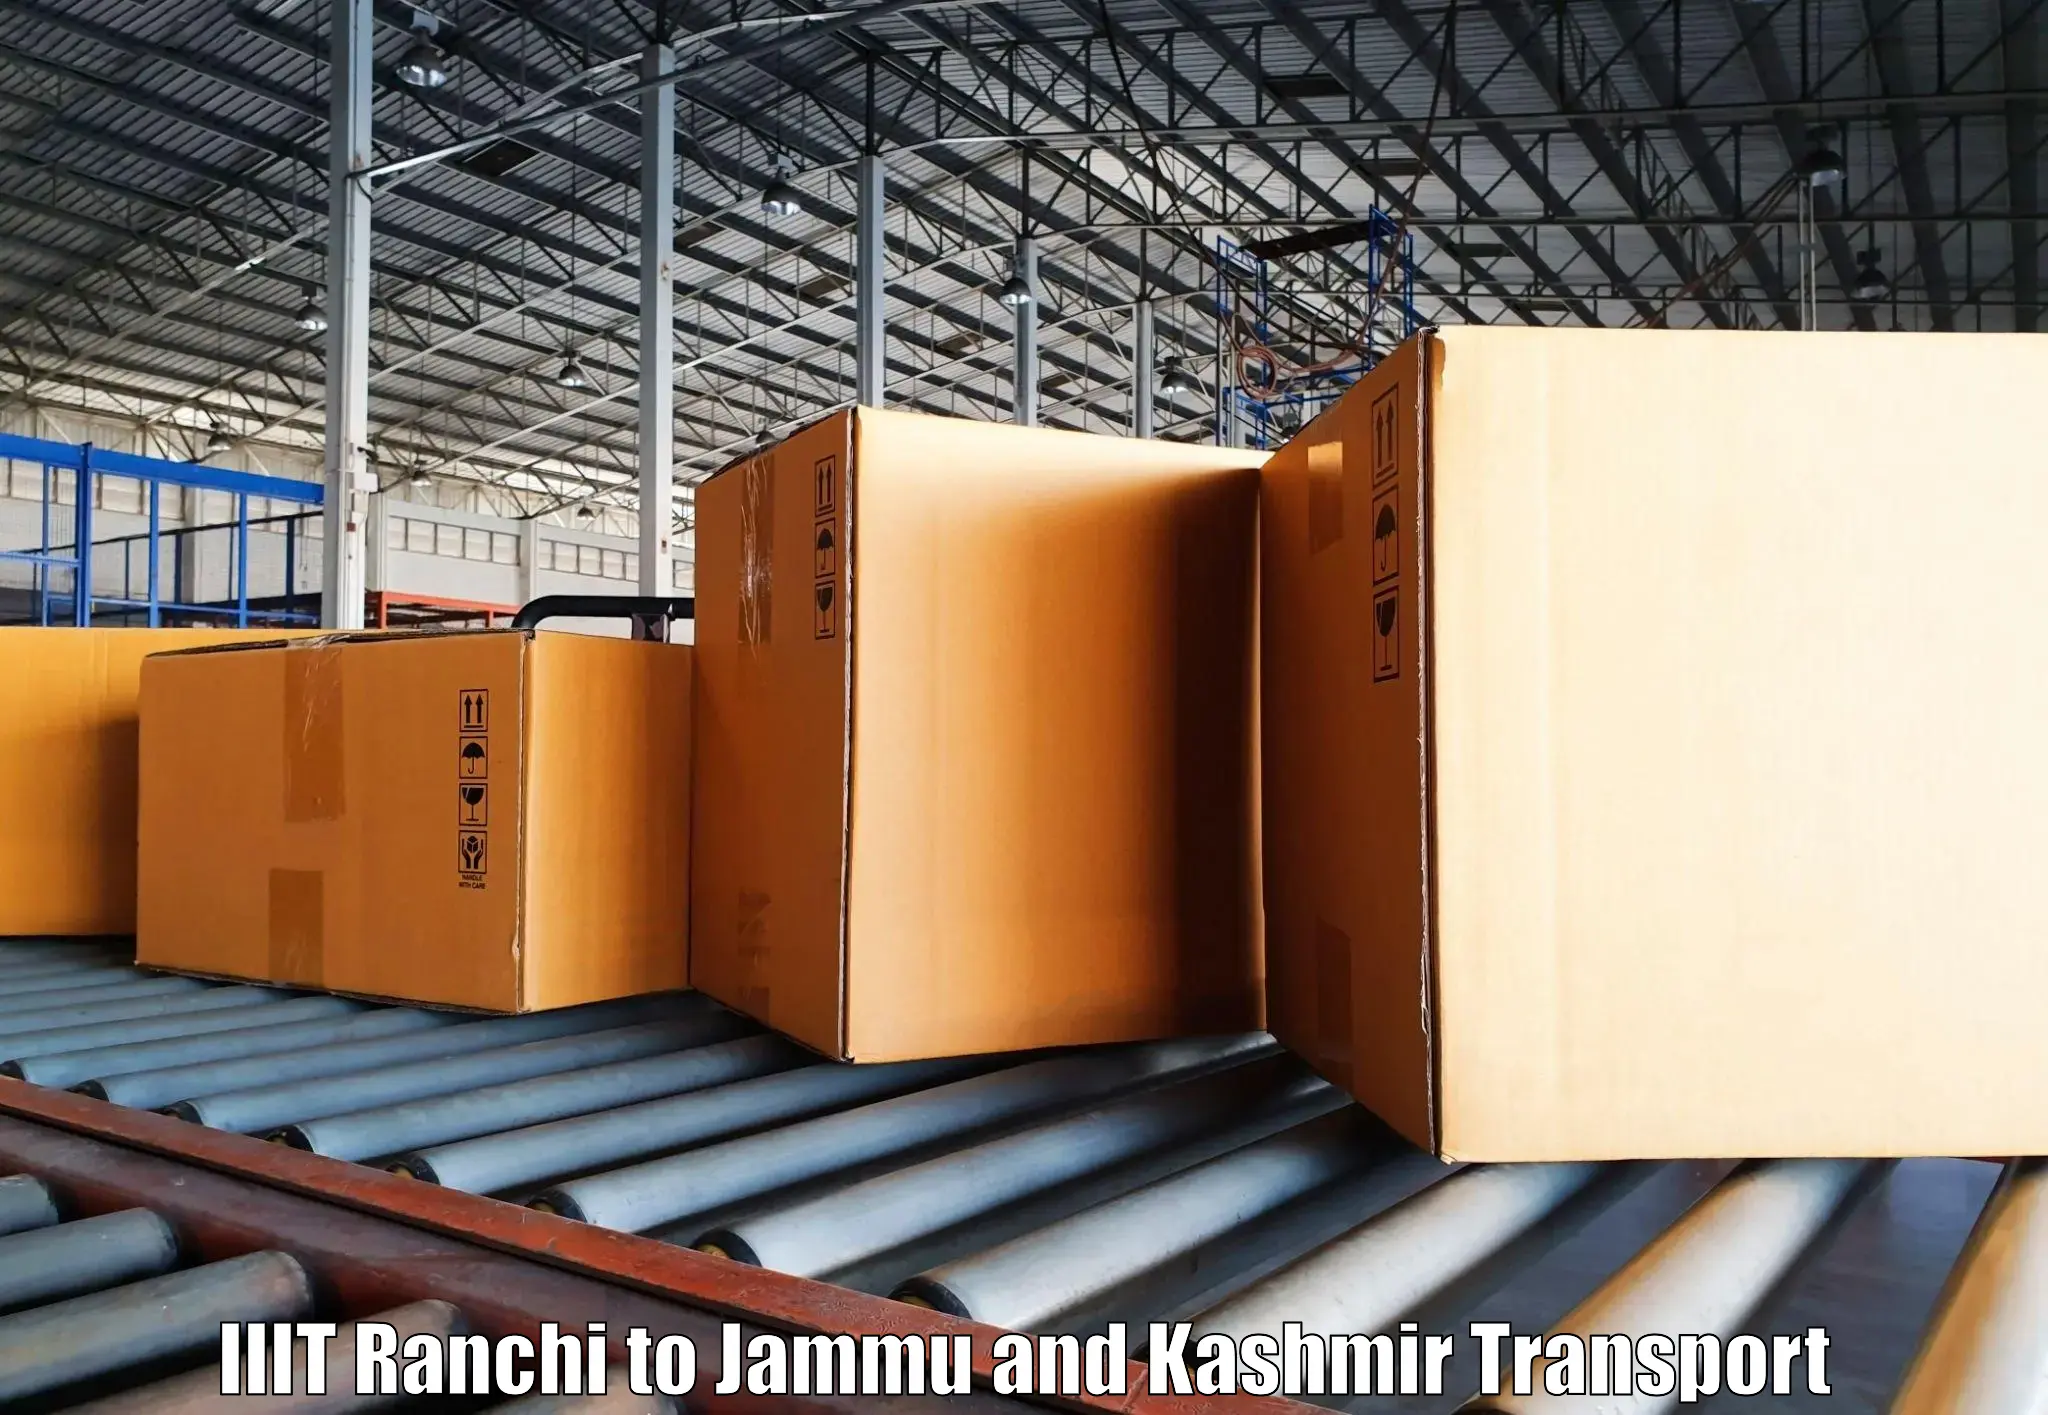 Cycle transportation service IIIT Ranchi to Jammu and Kashmir